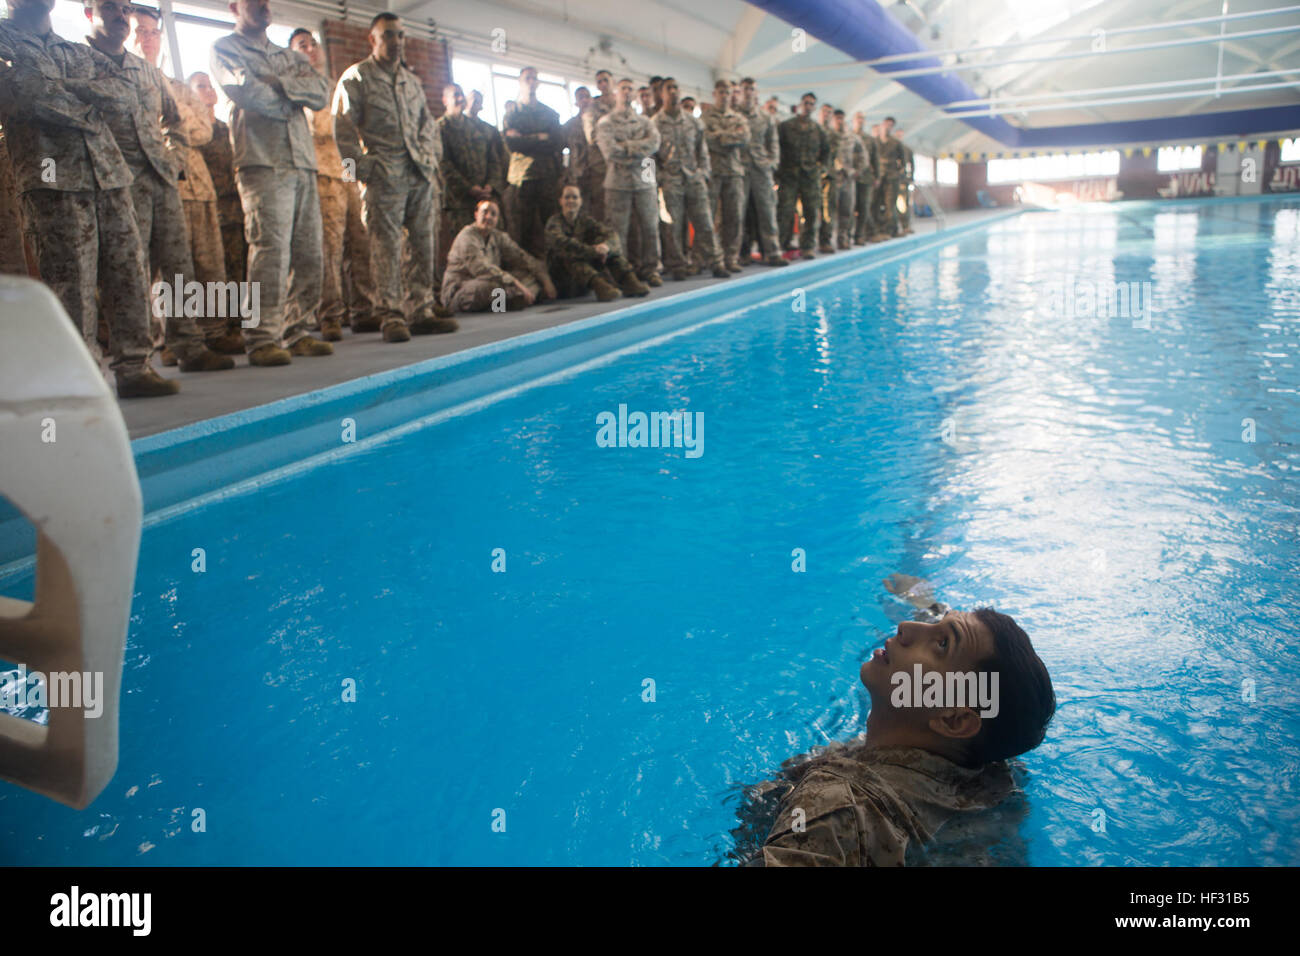 Corporal Andy Orozco, the assistant Marine Corps Instructor of Water Survival for the swim qualification, demonstrates various swimming techniques to the Marines being tested aboard Marine Corps Base Camp Lejeune, March 5, 2015. Marines have to get re-certified in water survival every two years on active duty, or every three years if they pass the intermediate swim qualification. (Official Marine Corps photo by Cpl. Scott W. Whiting) Marines get their feet wet during swim qualification 150305-M-FD819-419 Stock Photo